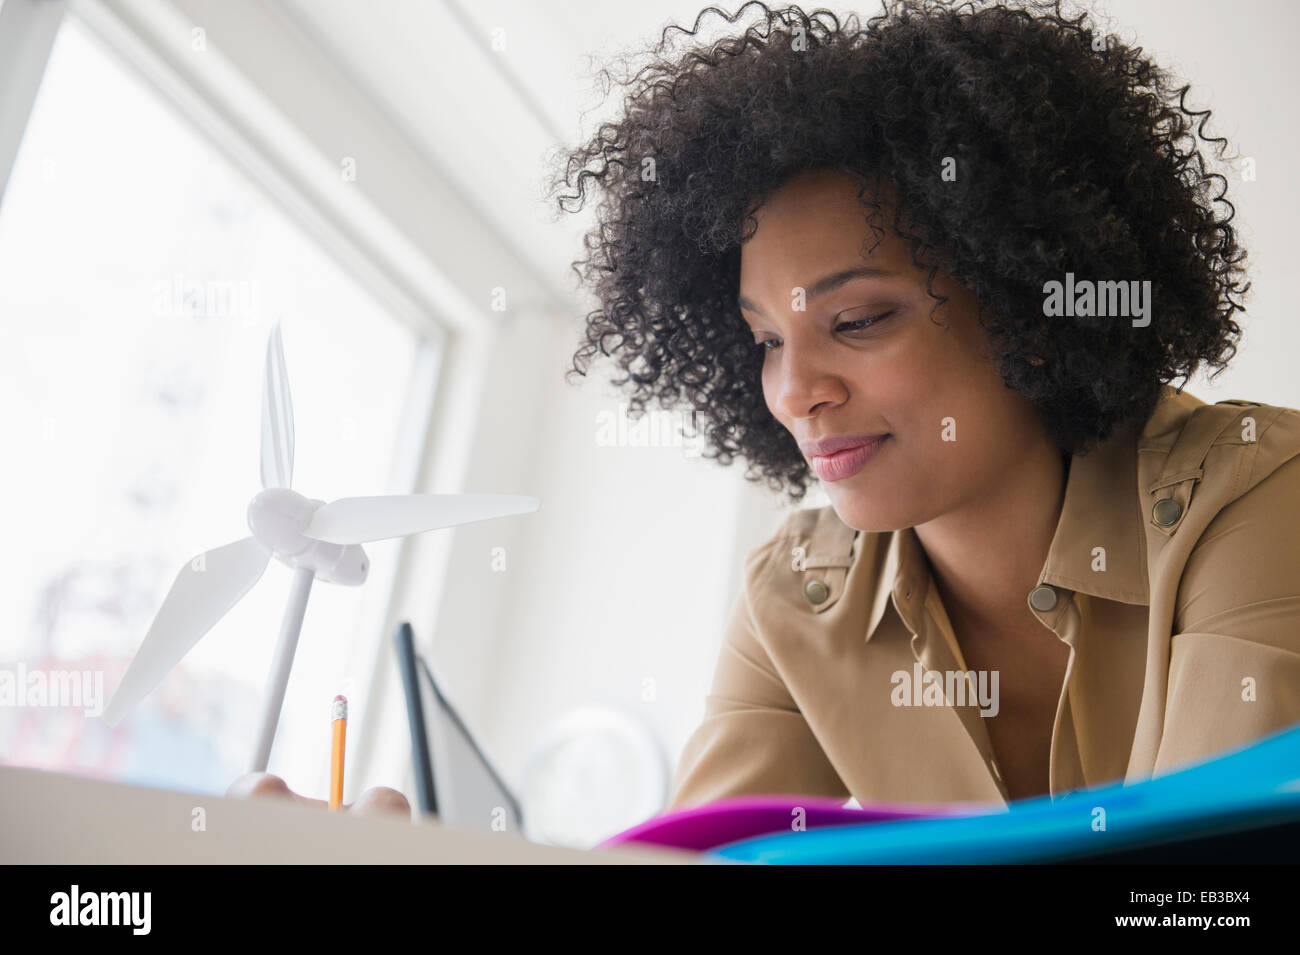 Low angle view of businesswoman working at desk Banque D'Images